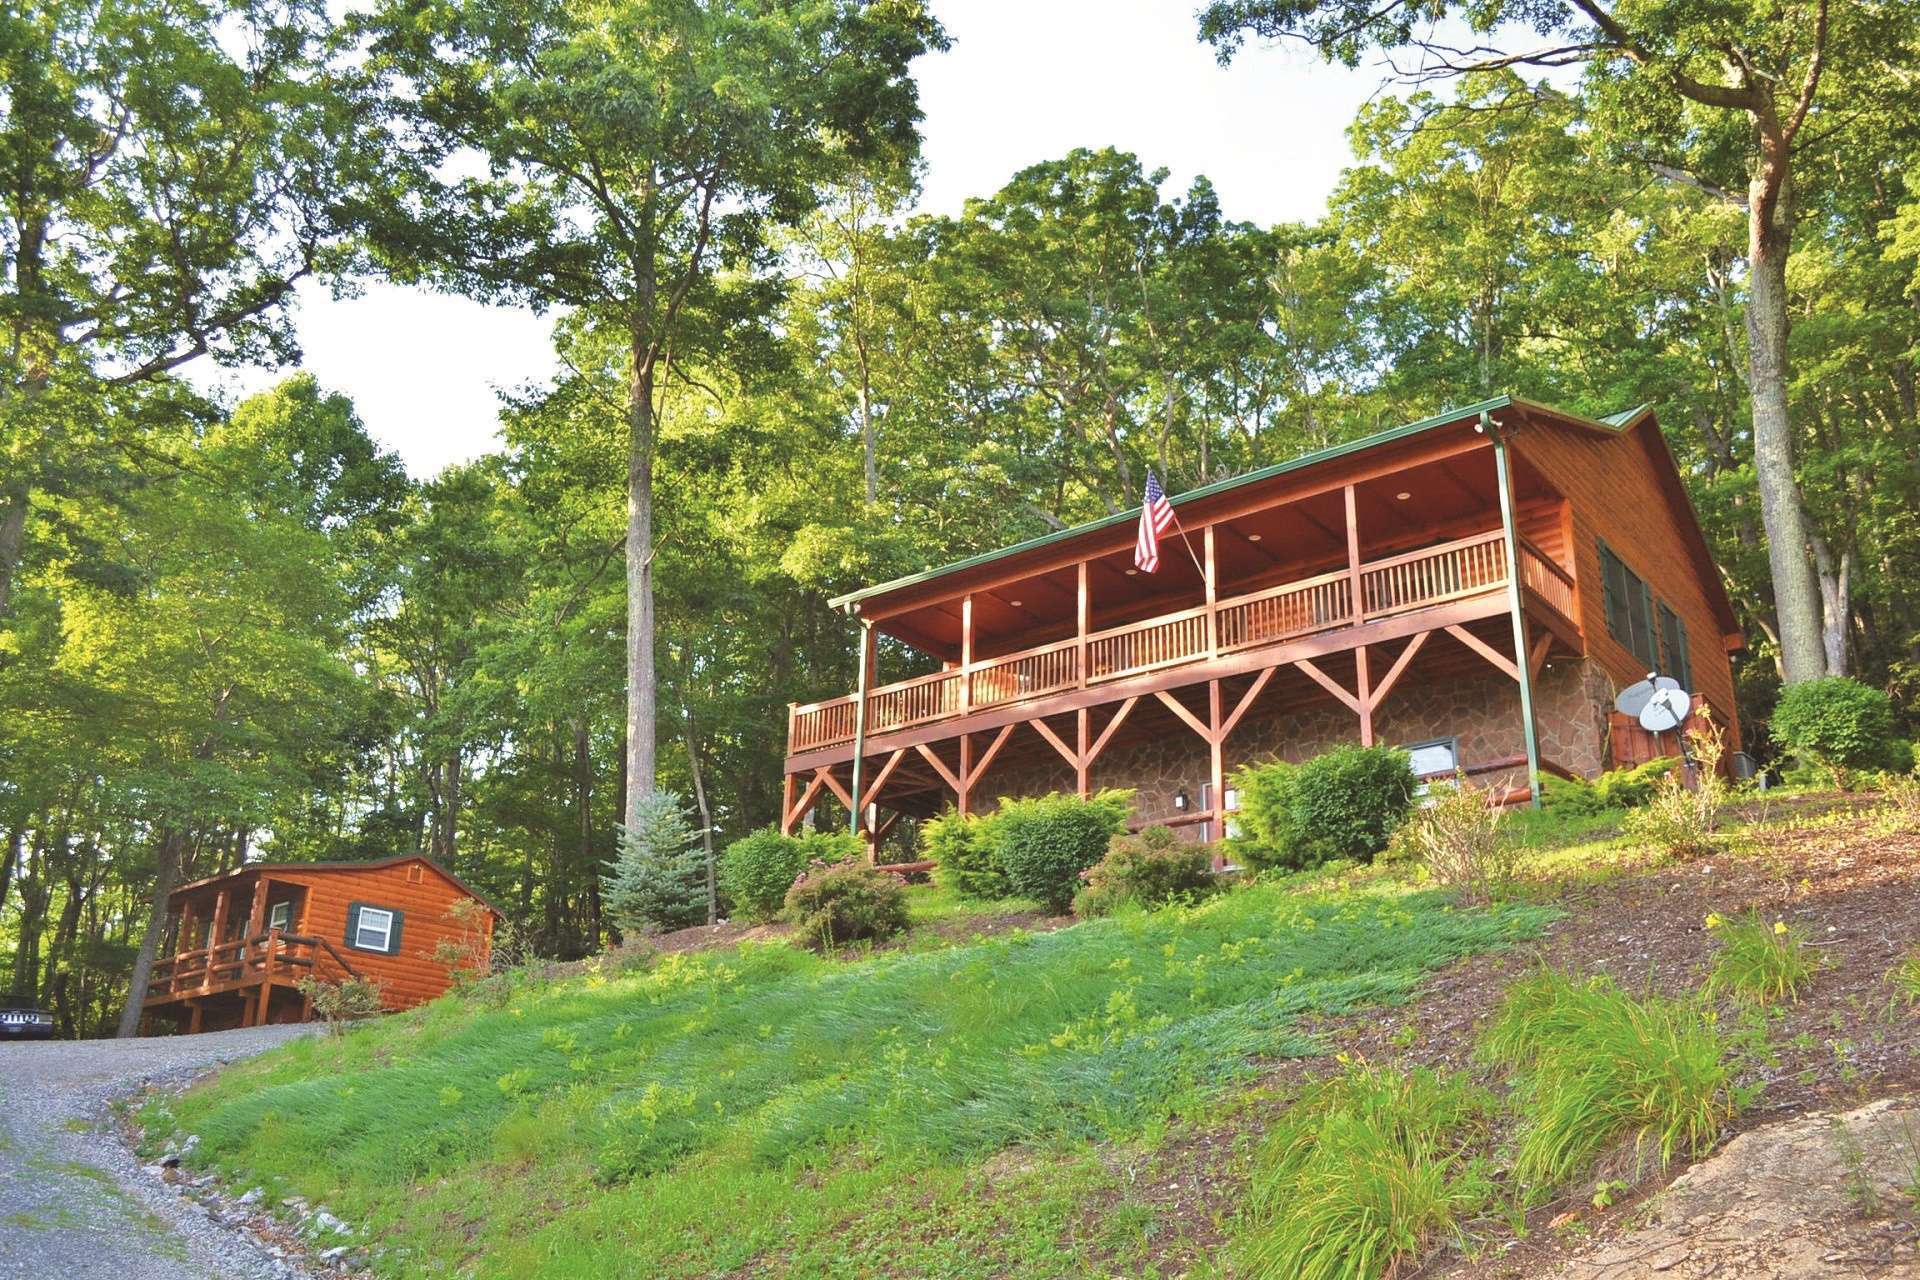 This custom cabin sits majestically on a knoll overlooking lush pastures with mountains beyond. The 5+ acre wooded setting provides privacy.